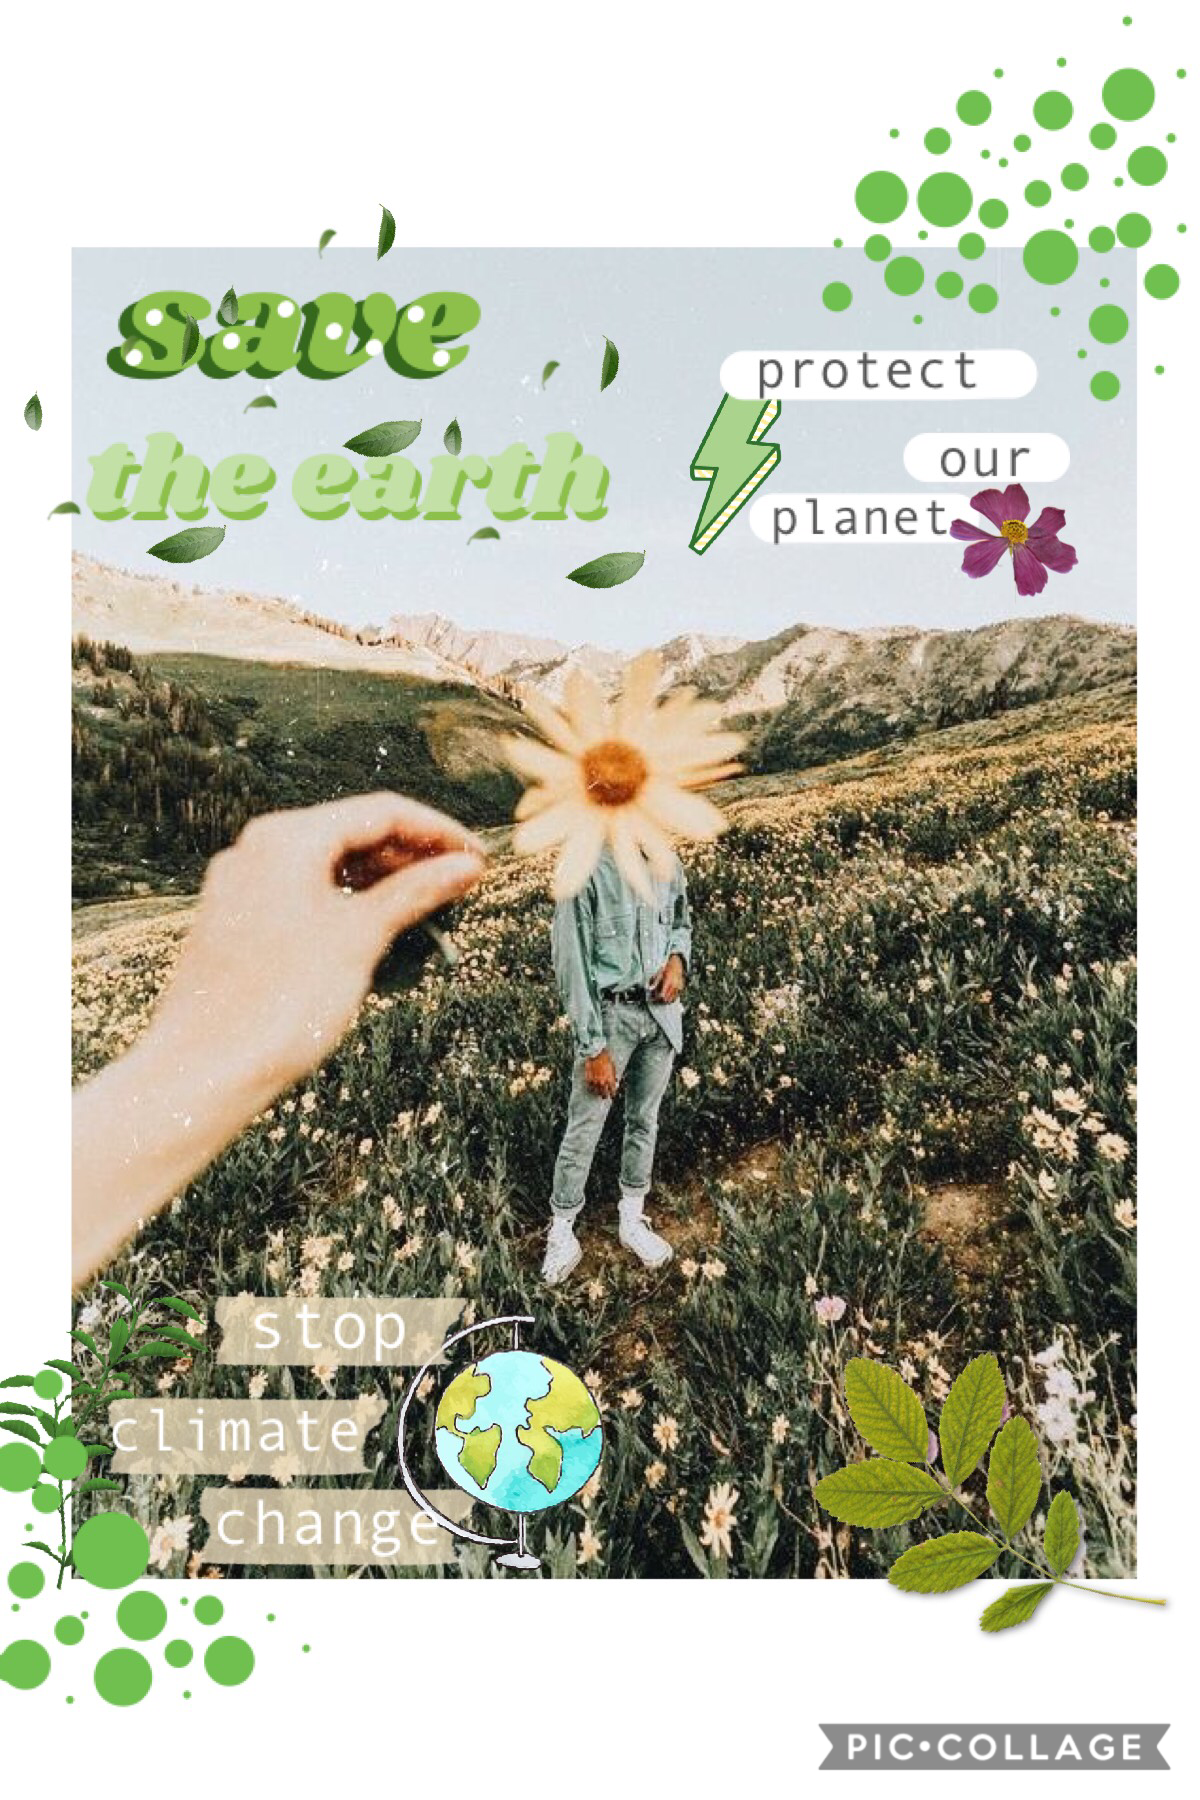 little one for the recent trend: saving the environment 🌿👏🏽🍃⚡️ yeee & QOTD: last meal you ate??
AOTD: soup (just got braces so that's pretty much all i can eat) 